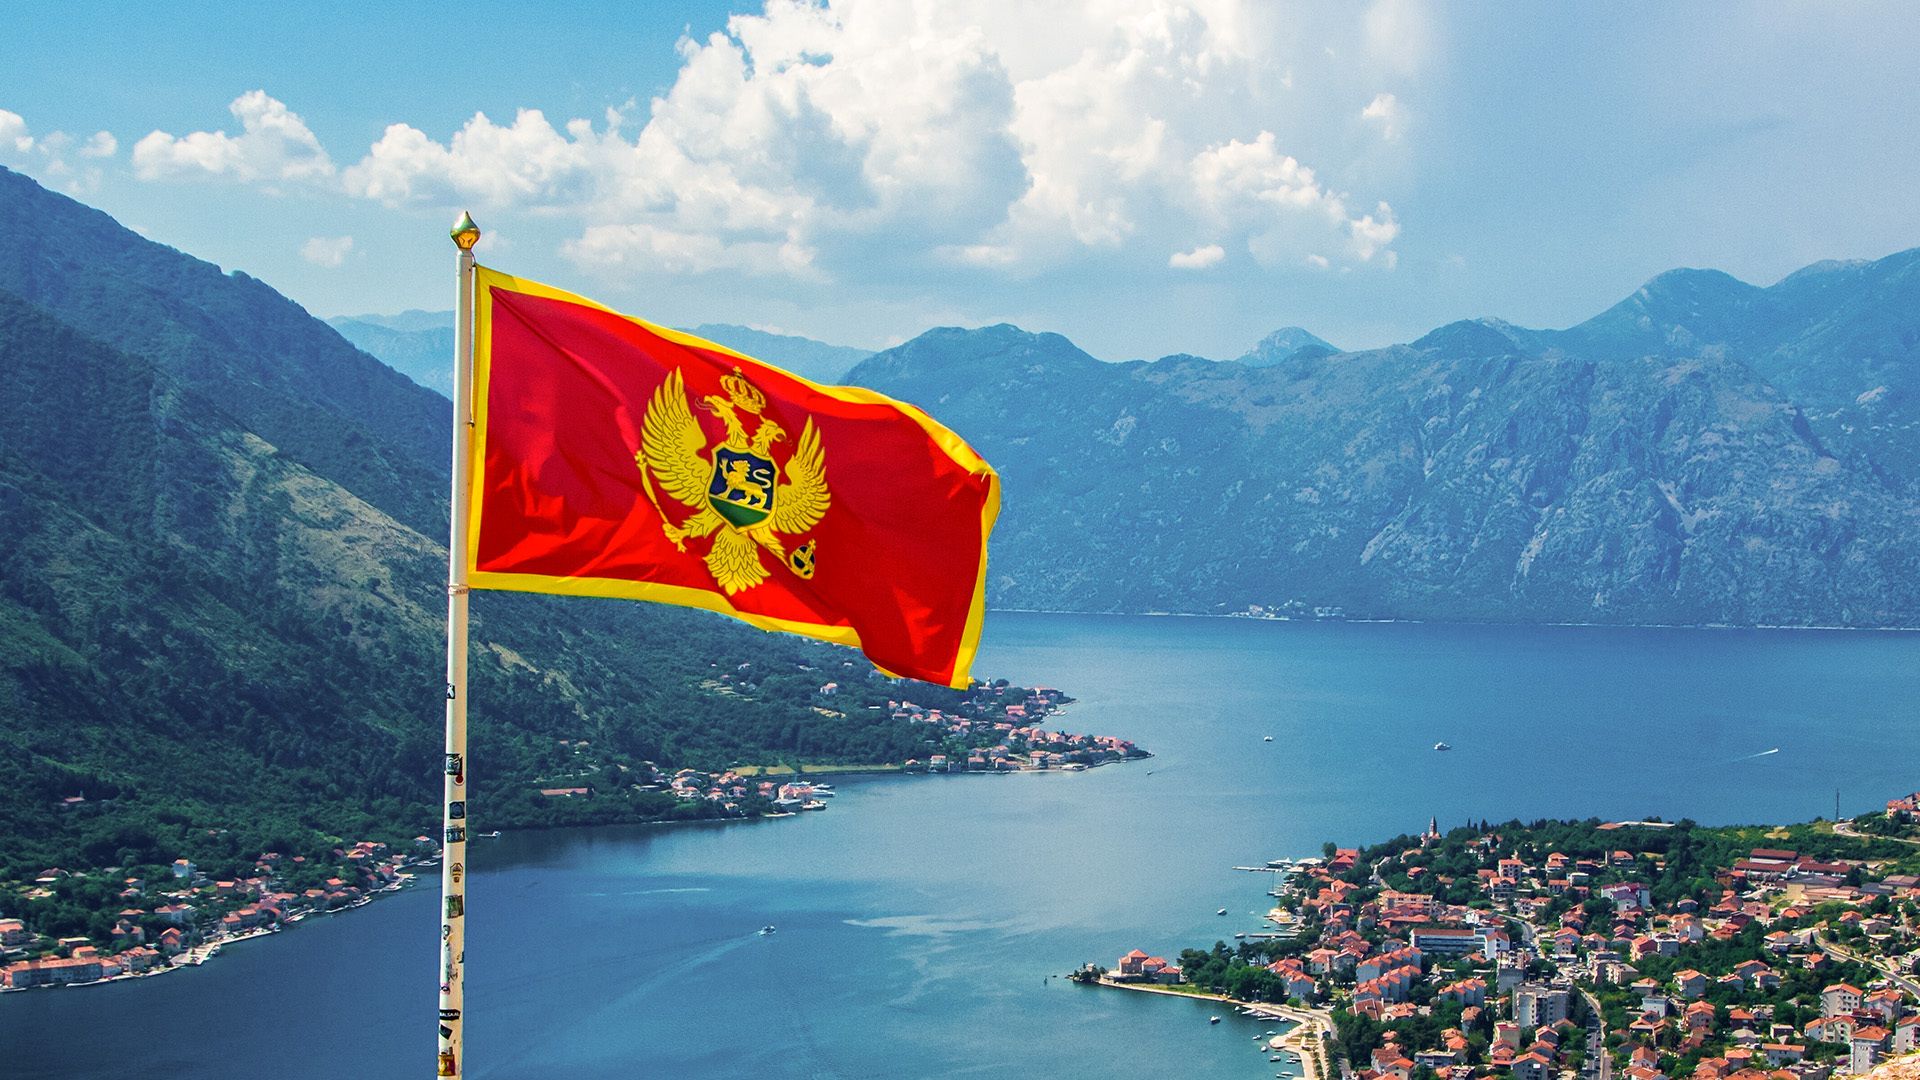 Montenegro flag waving in front of riverside and mountain landscape